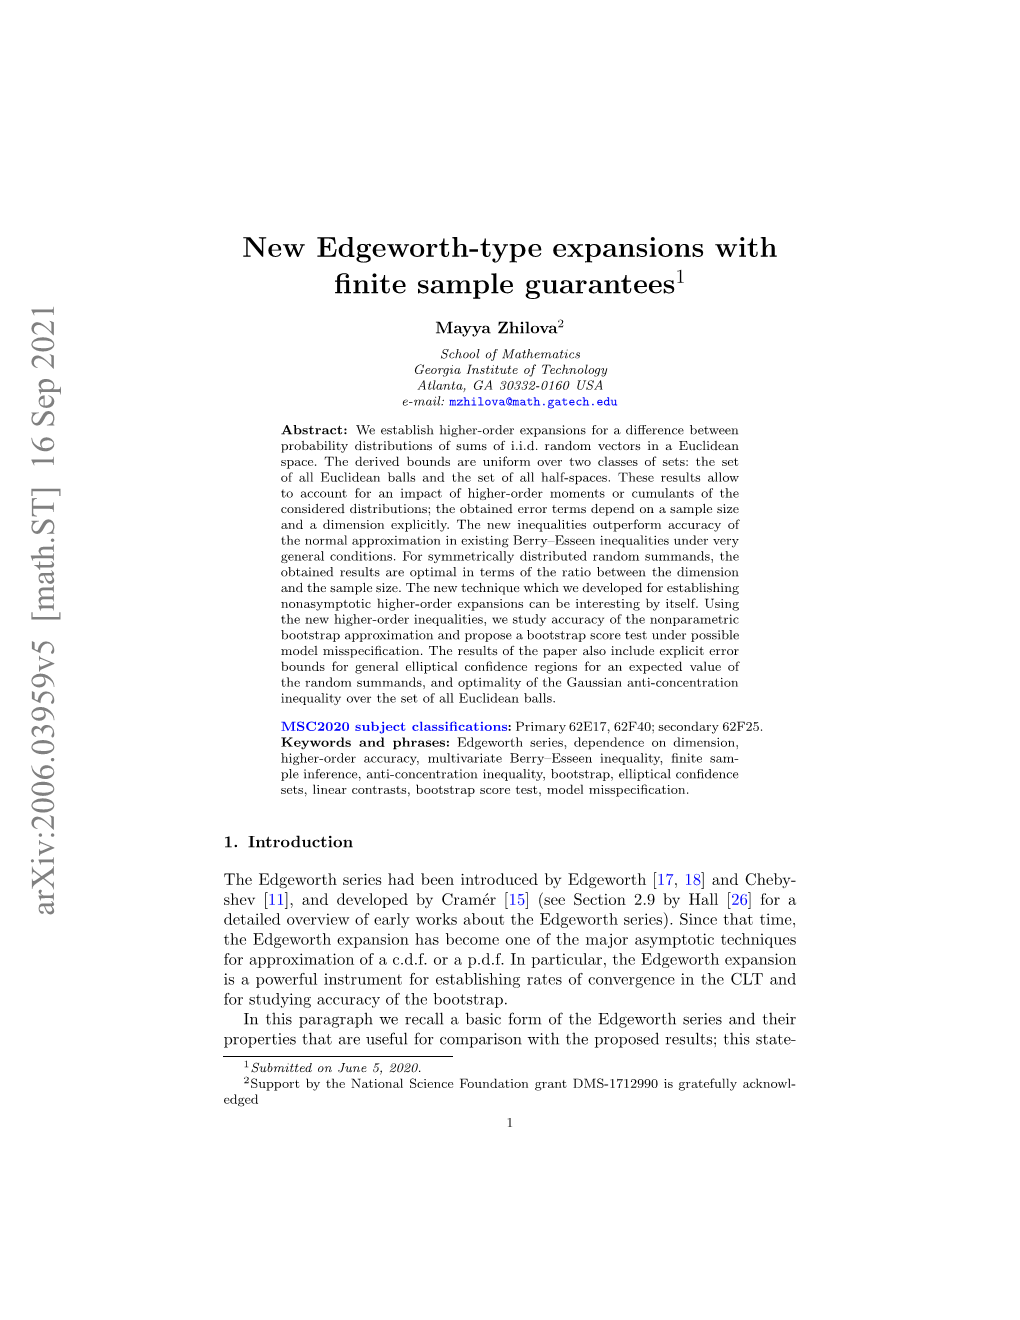 New Edgeworth-Type Expansions with Finite Sample Guarantees1]A2